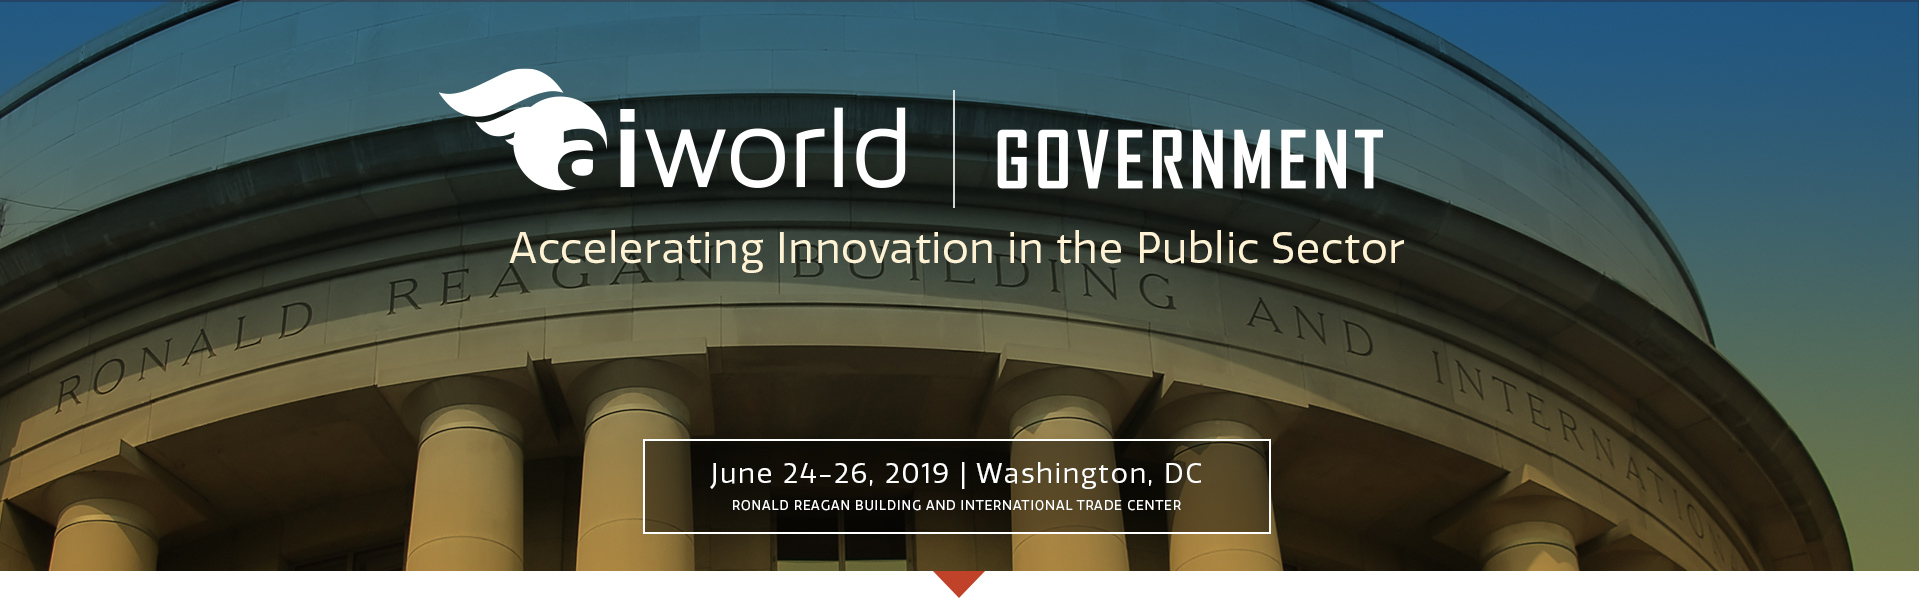 The Introduction of AI World Government Conference 2019